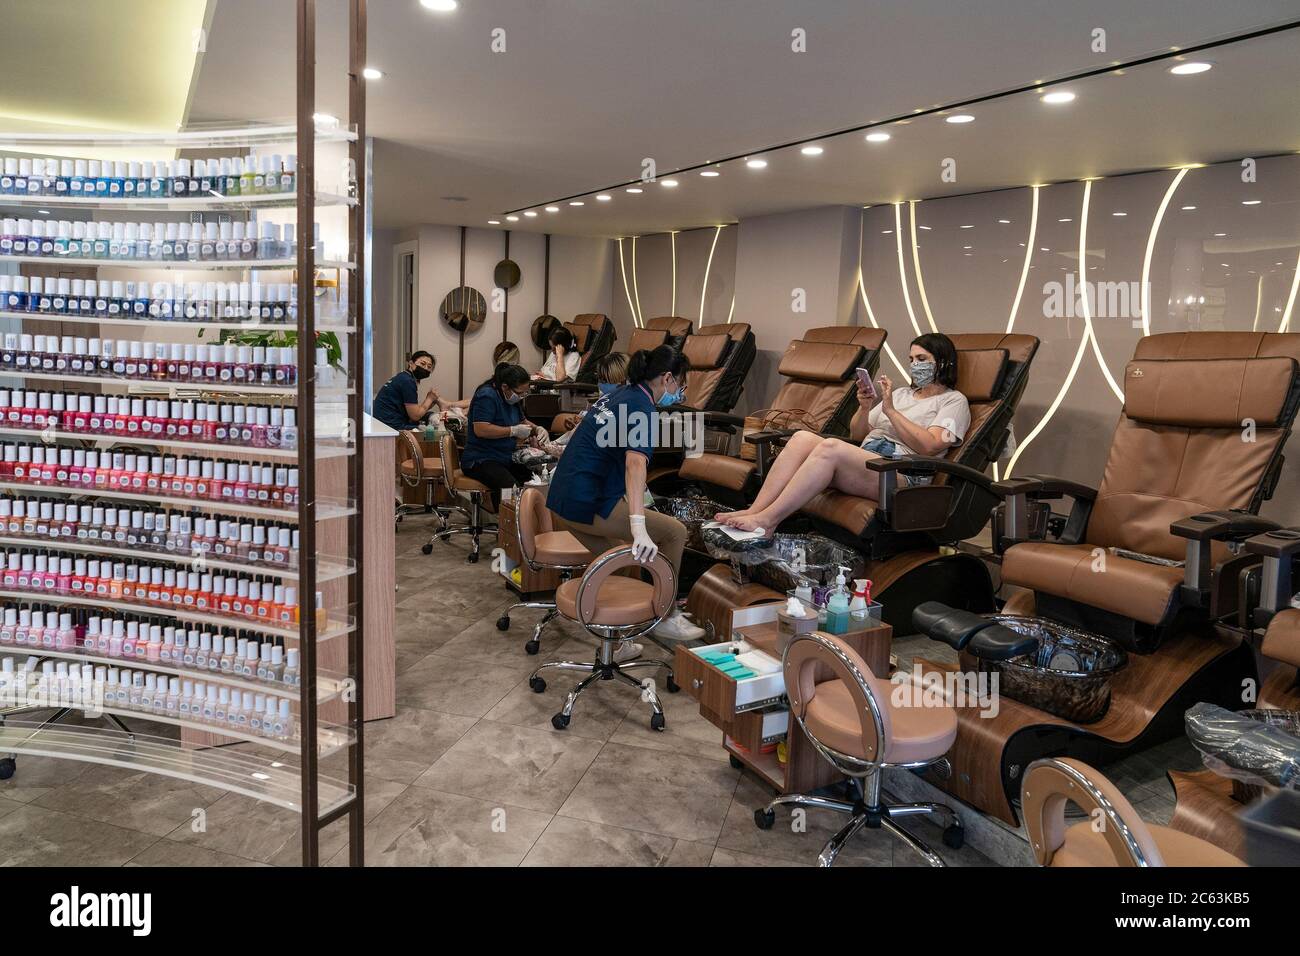 nail salons are opened for business as part of phase three of reopening amid covid 19 pandemic in new york on july 6 2020 view of bona nail salon with customers and employees wearing faca masks and gloves and keeping social distance salons are required to serve up to 50 capacity photo by lev radinsipa usa 2C63KB5